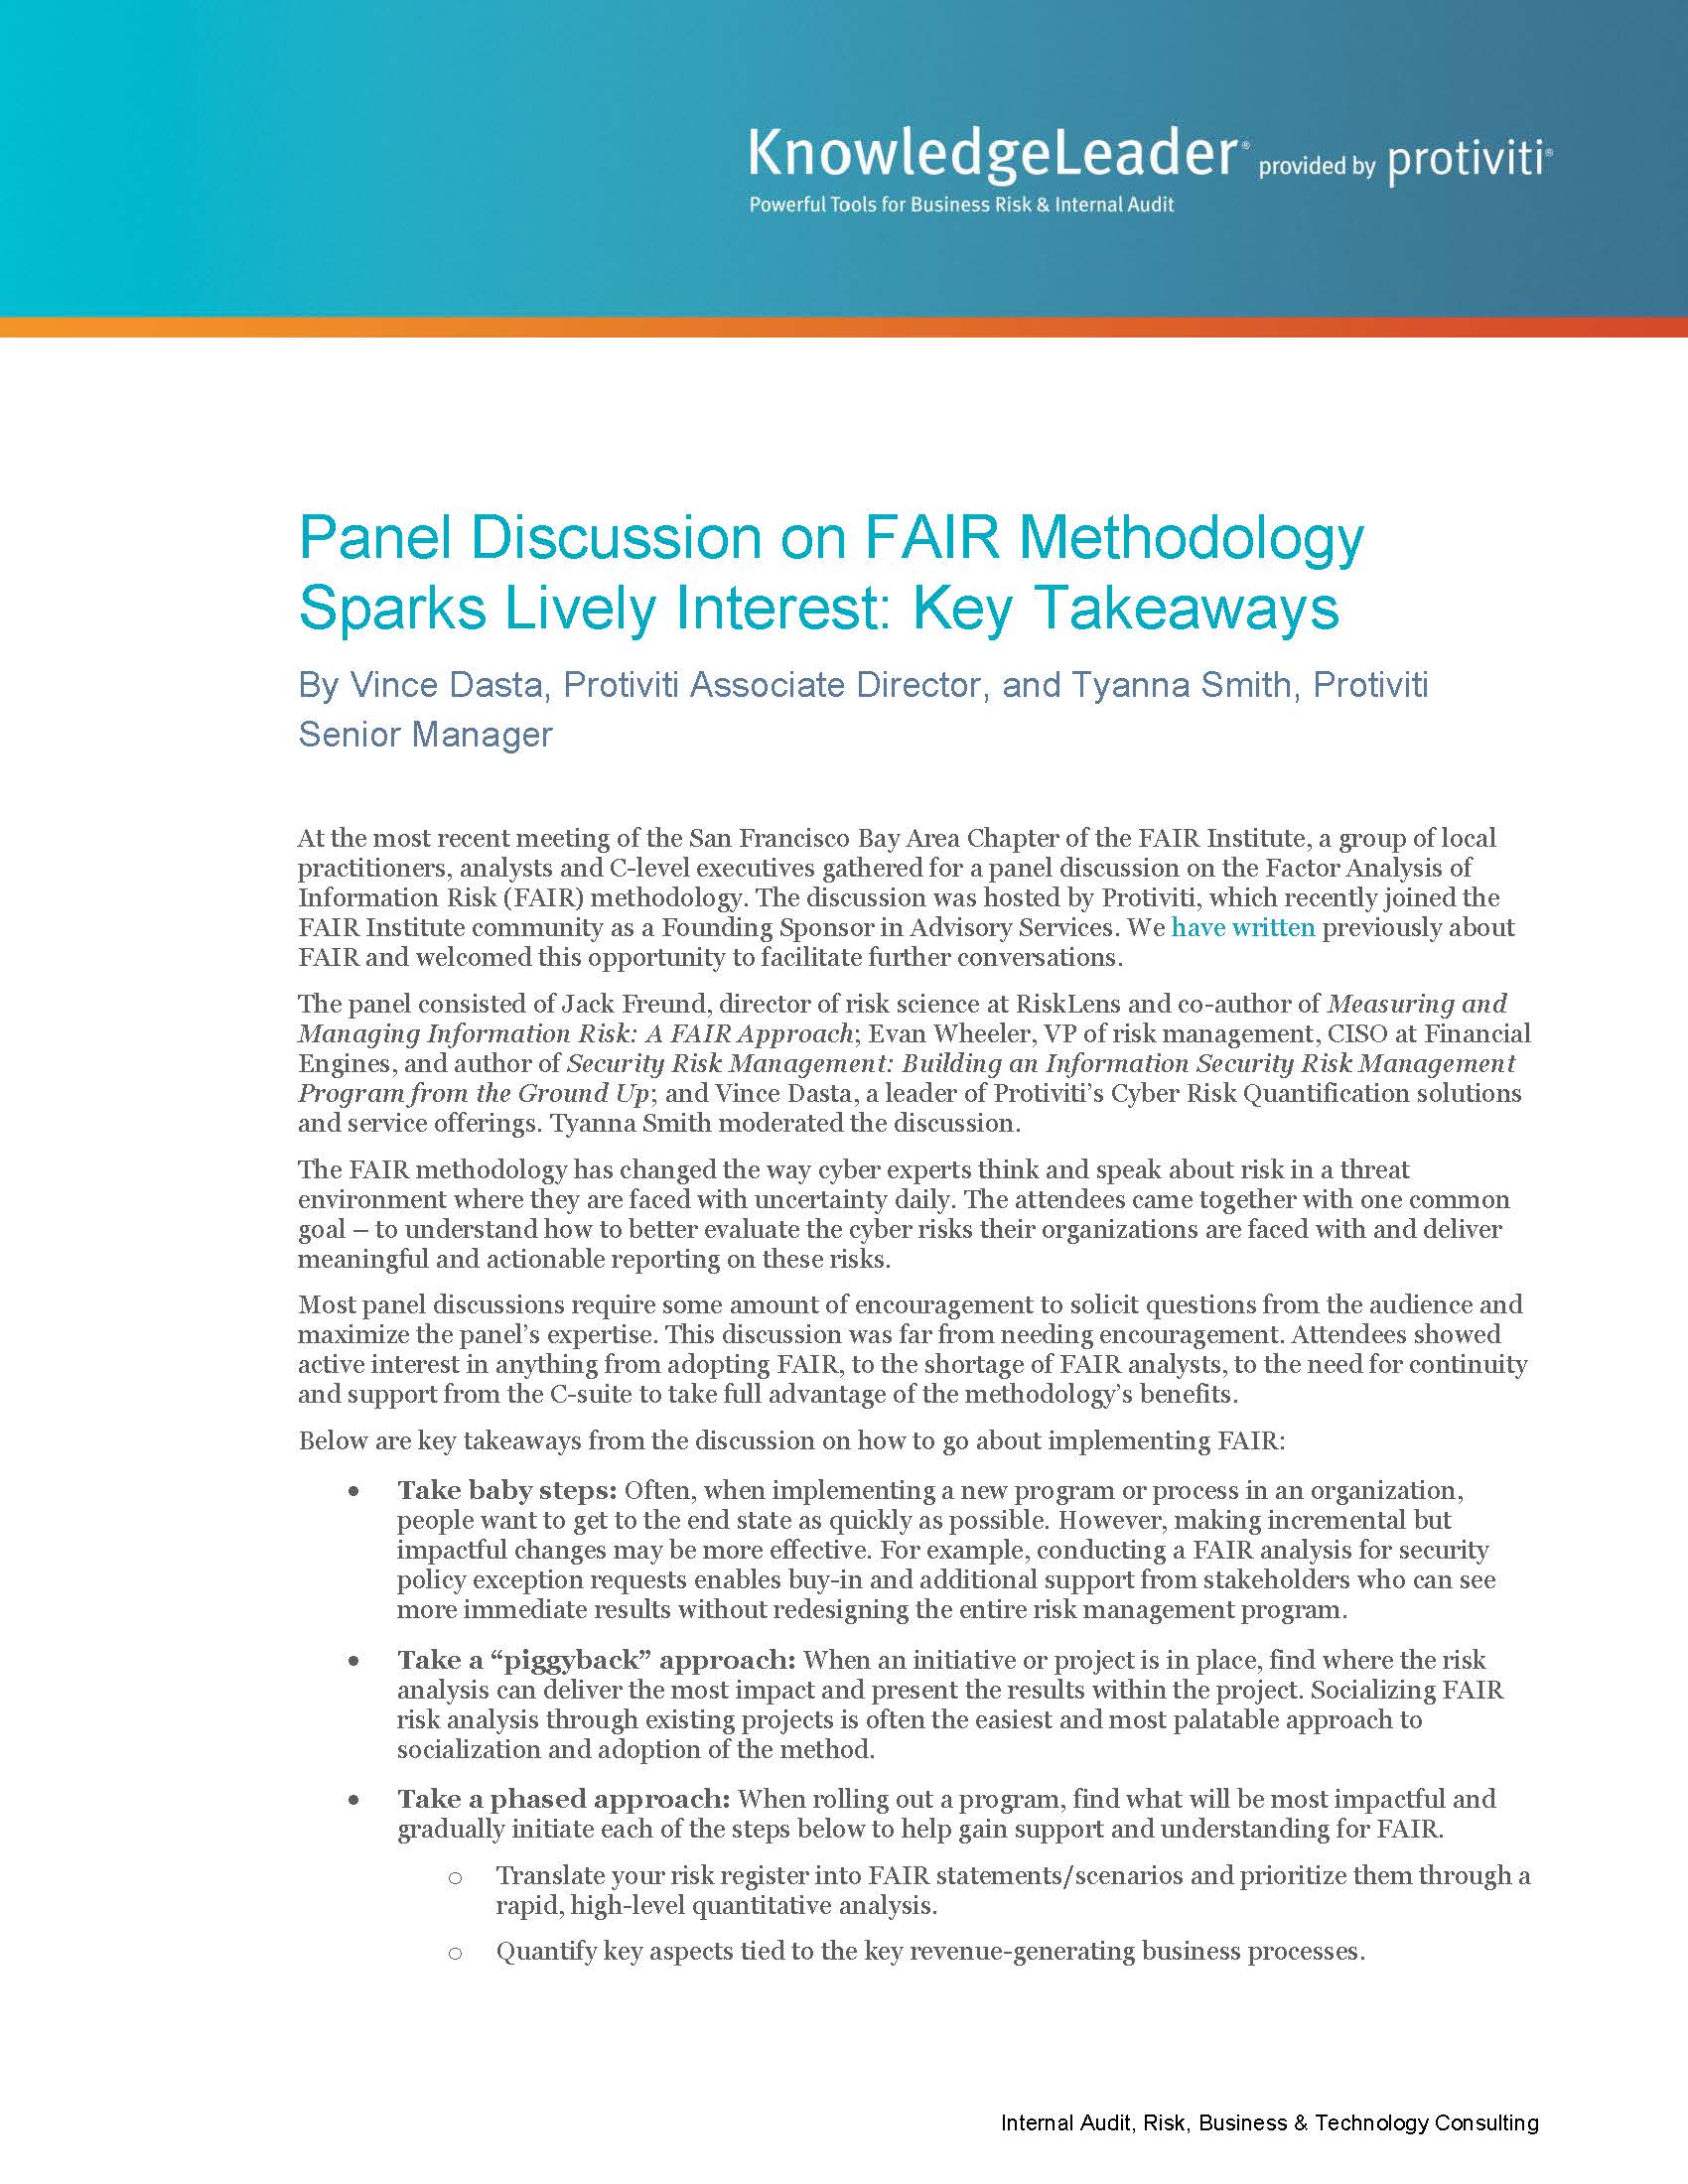 Screenshot of the first page of Panel Discussion on FAIR Methodology Sparks Lively Interest Key Takeaways